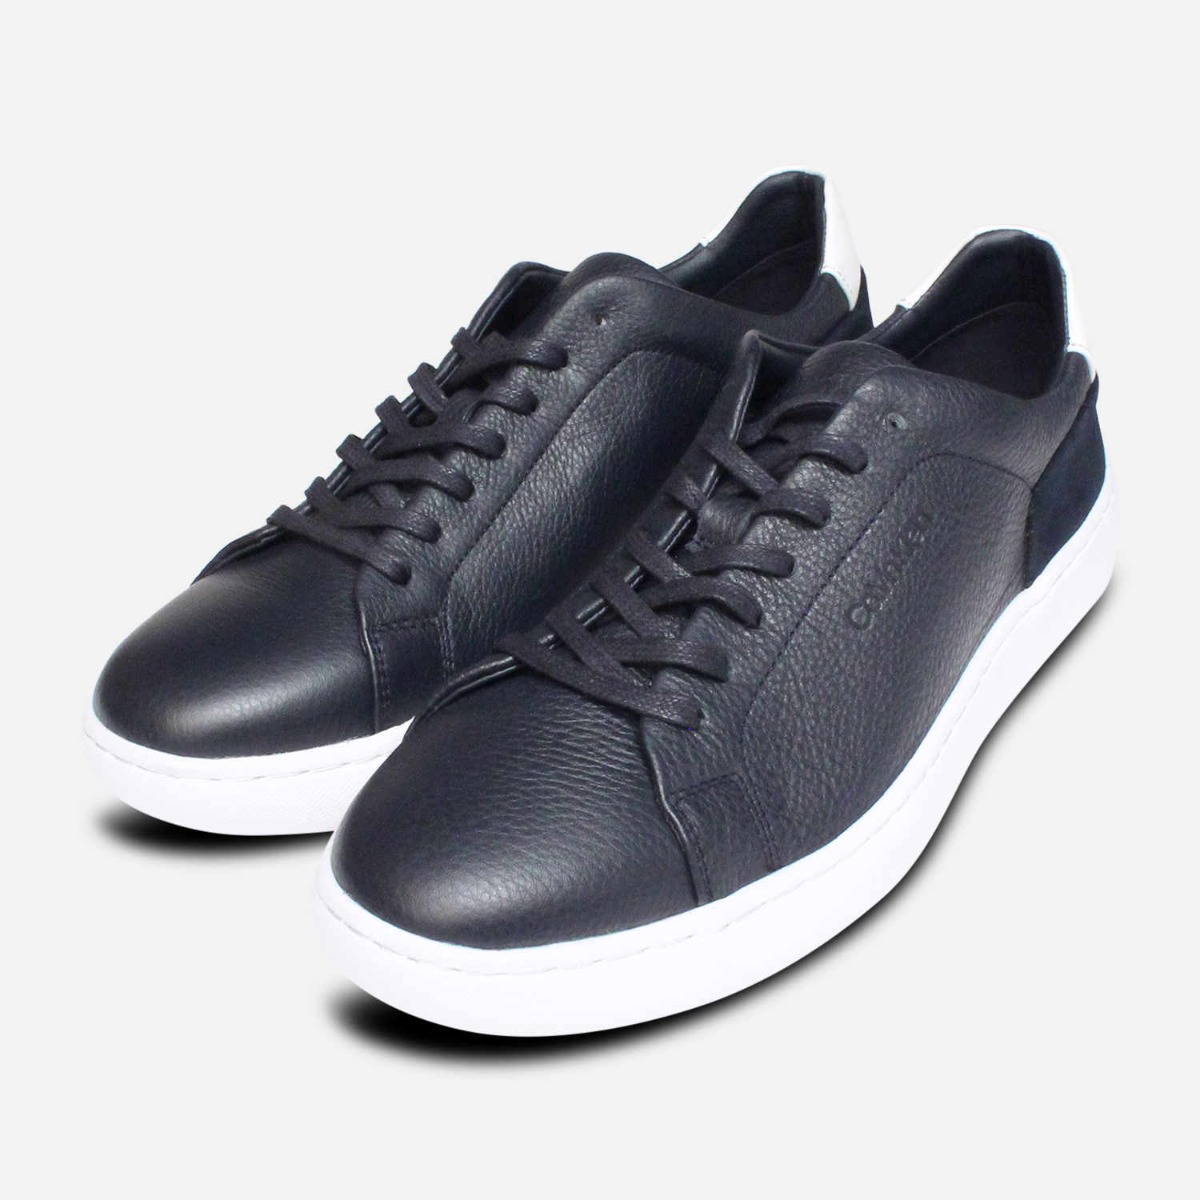 leather trainers calvin klein